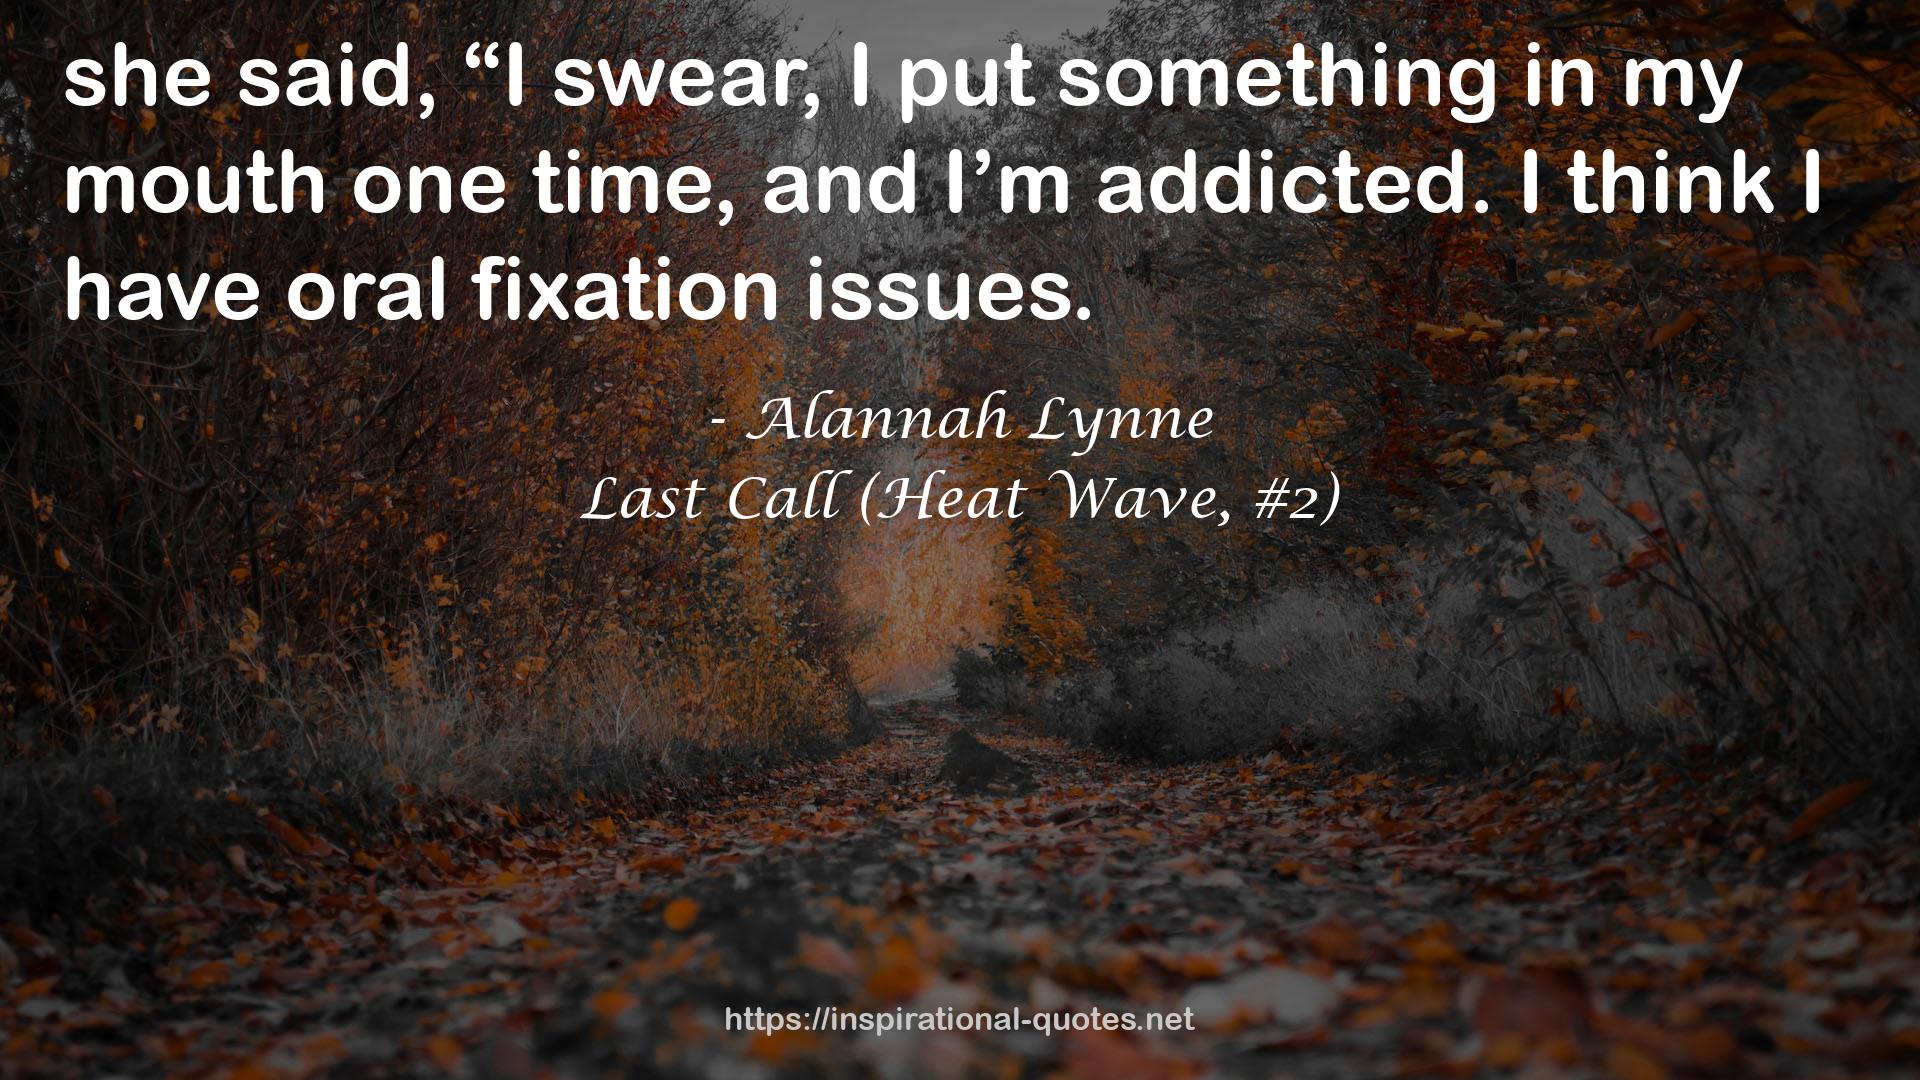 Last Call (Heat Wave, #2) QUOTES